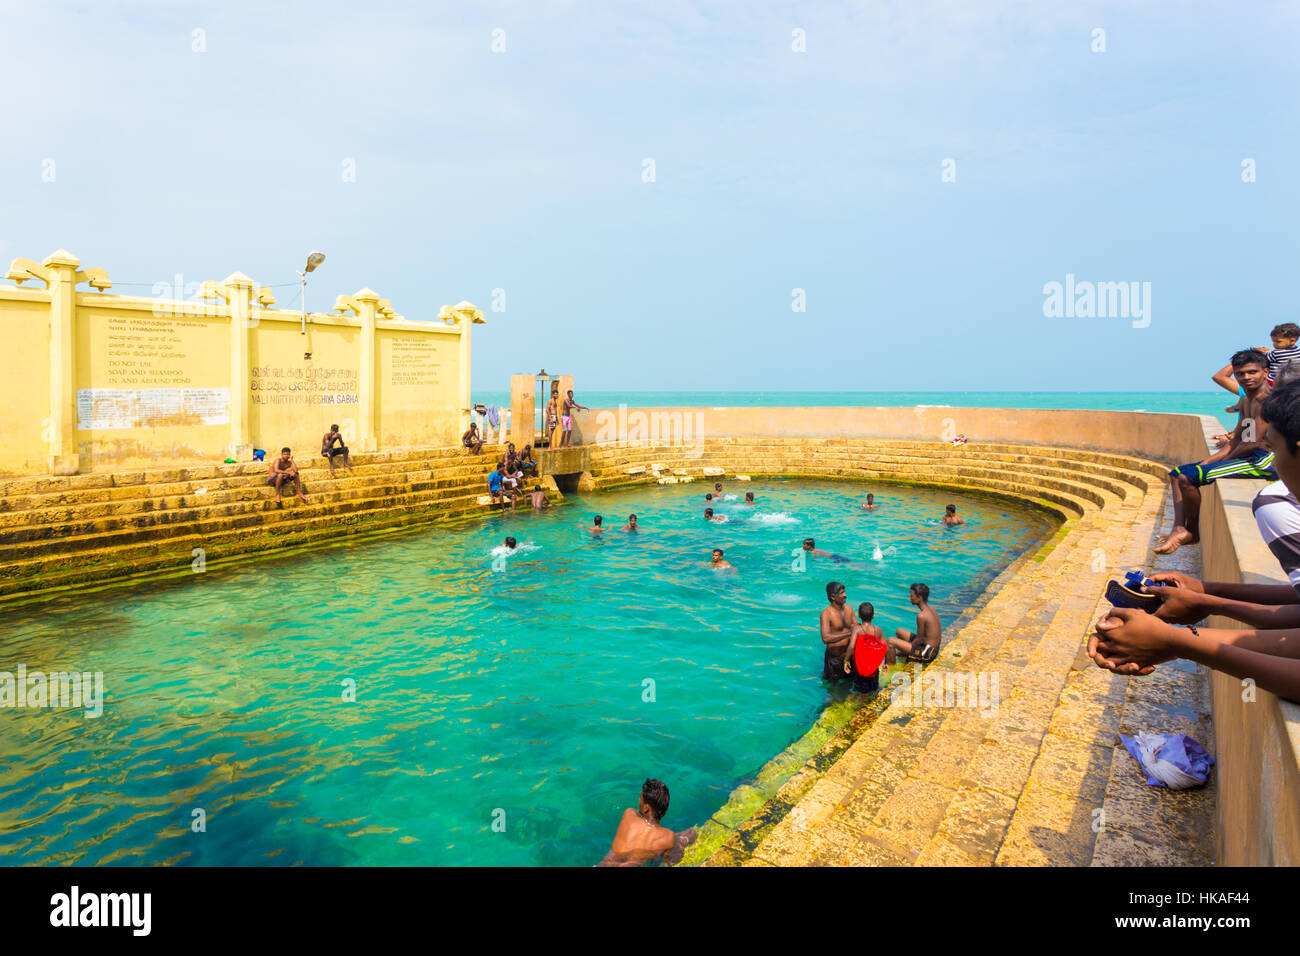 Sri Lankan swimmers enjoy the Keerimalai Hot Springs, a tourist attraction on the northern coast of Jaffna. Horizontal Stock Photo